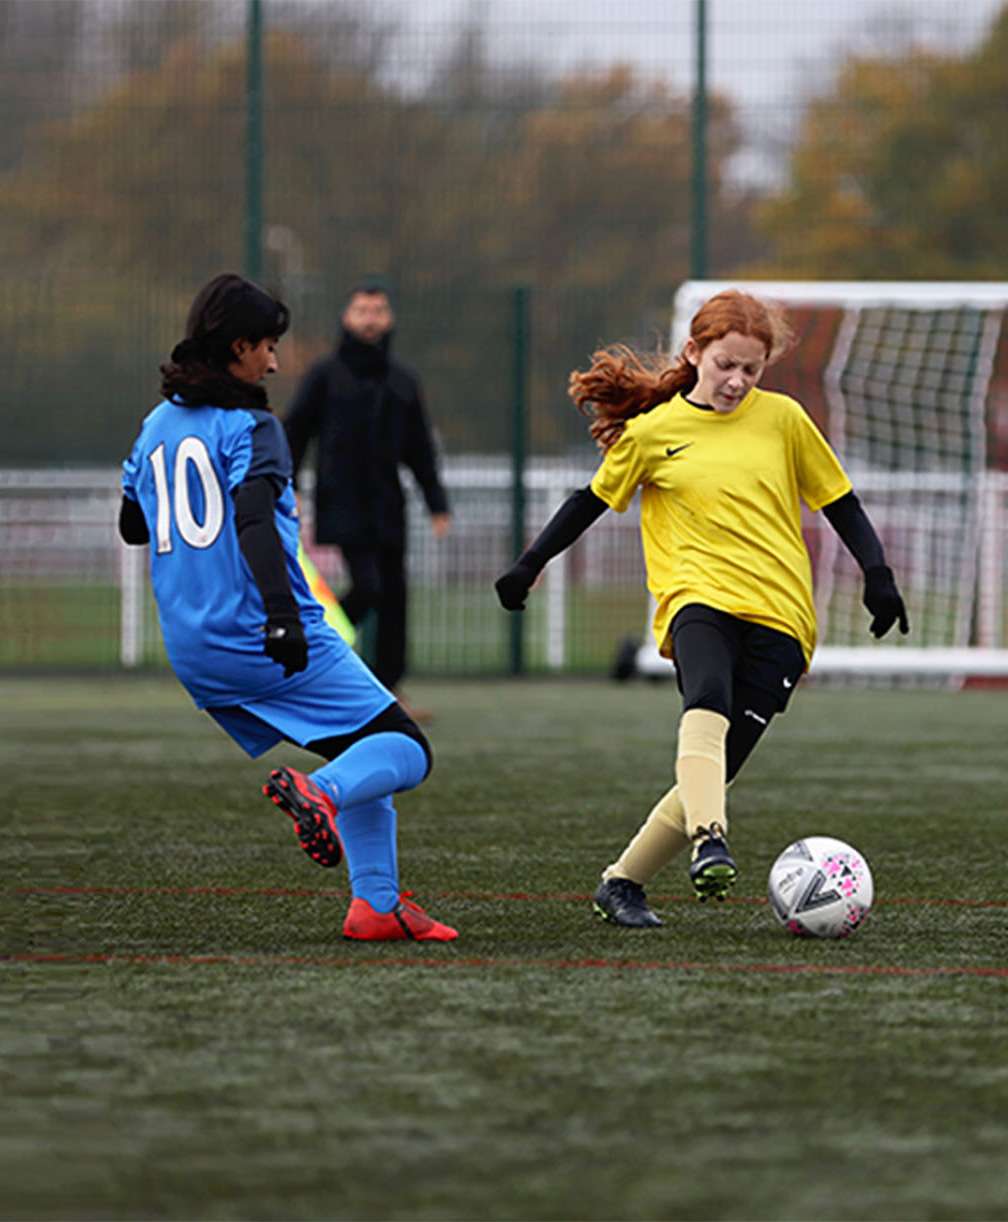 A young player, under pressure from an opponent, passes the ball with the inside of her foot during a match on a 3G pitch